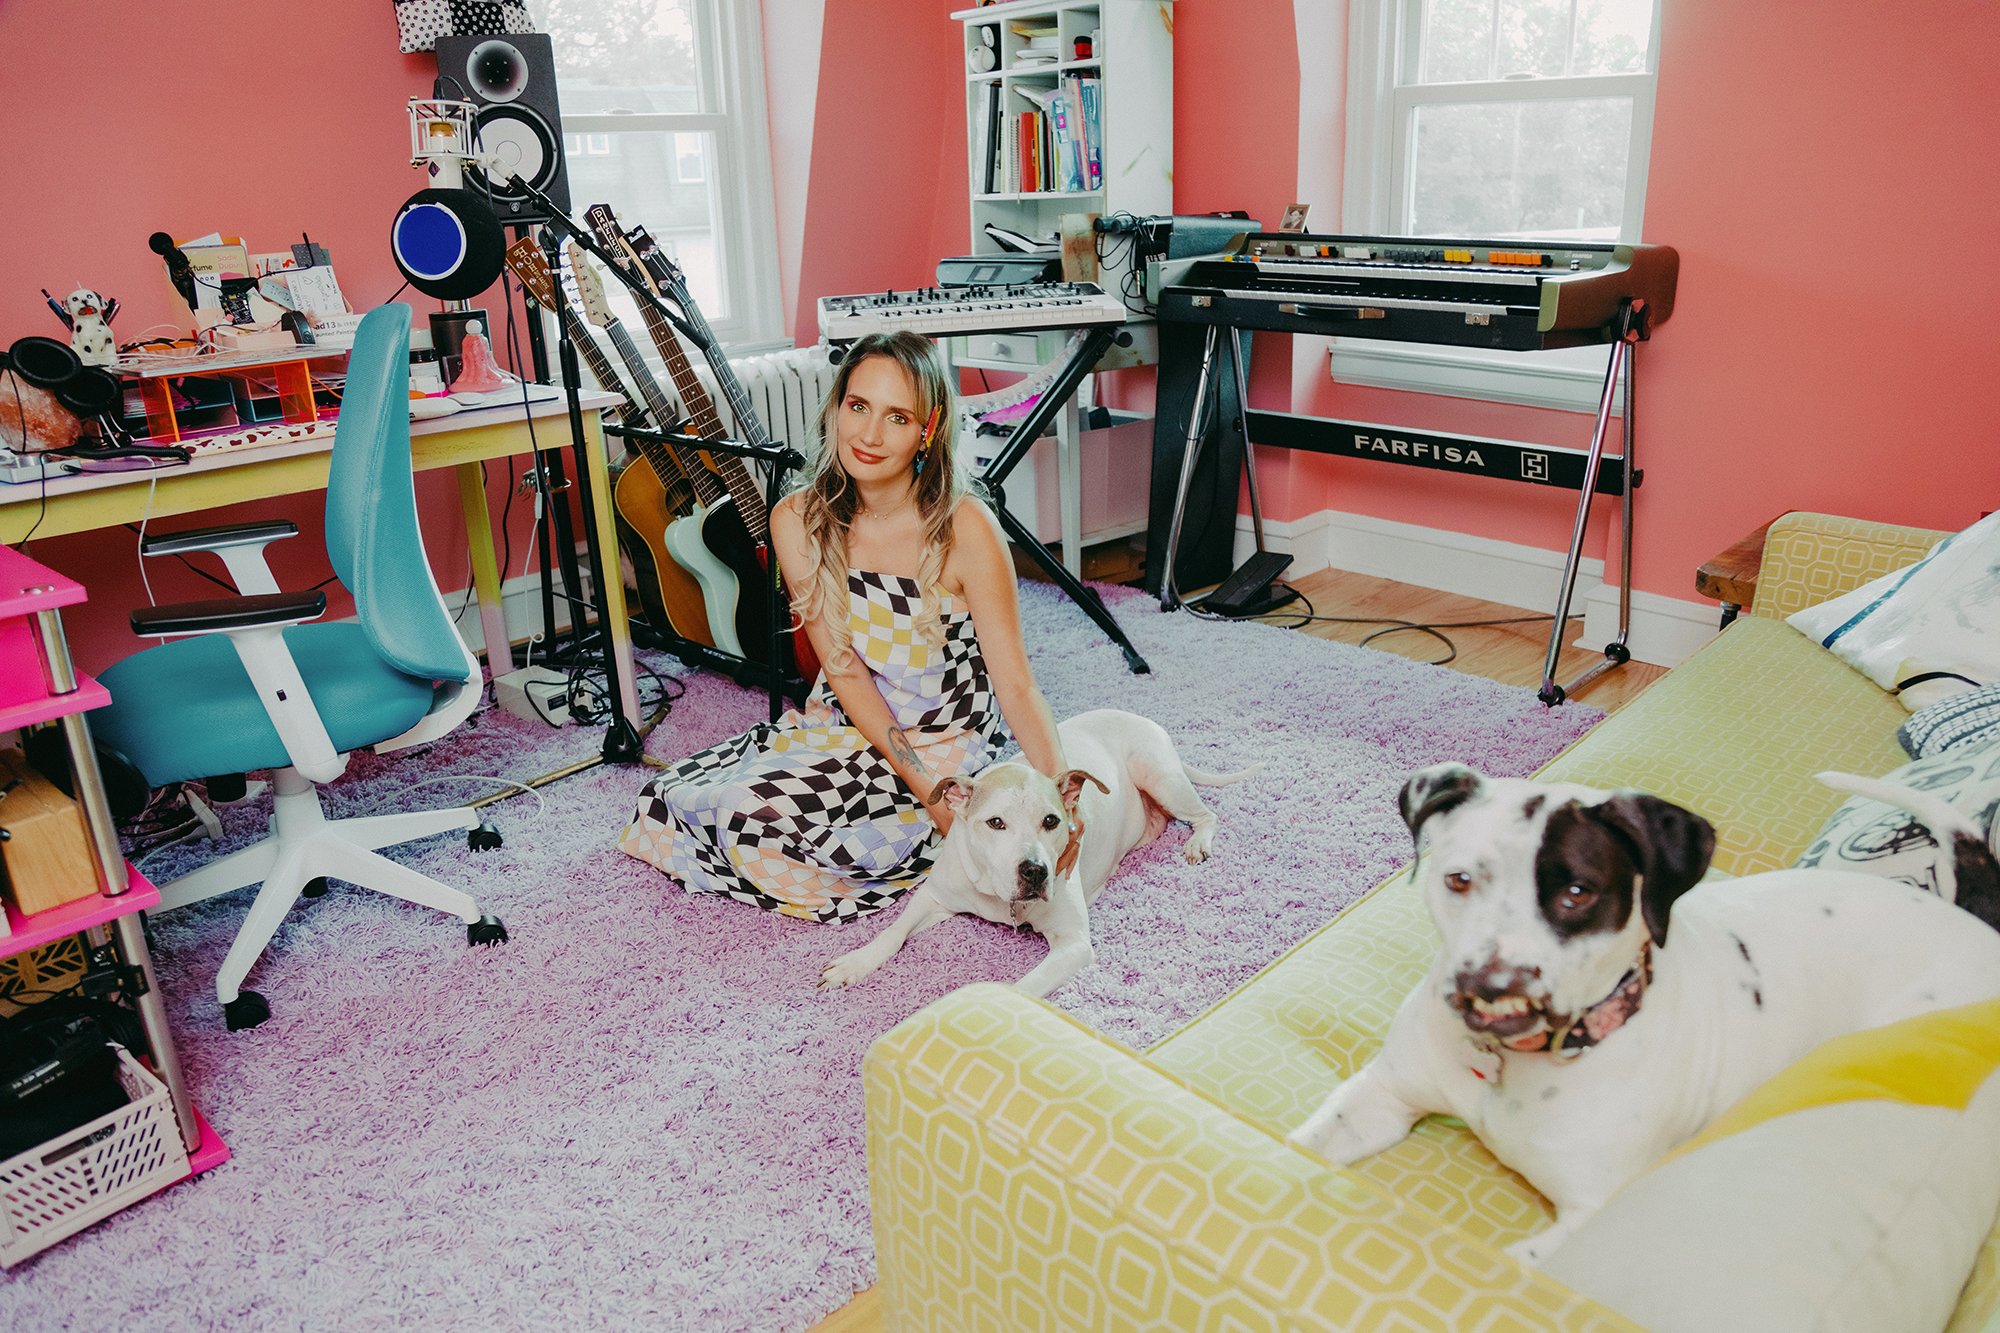 Sadie Dupuis with her dogs, Lavender & Buster